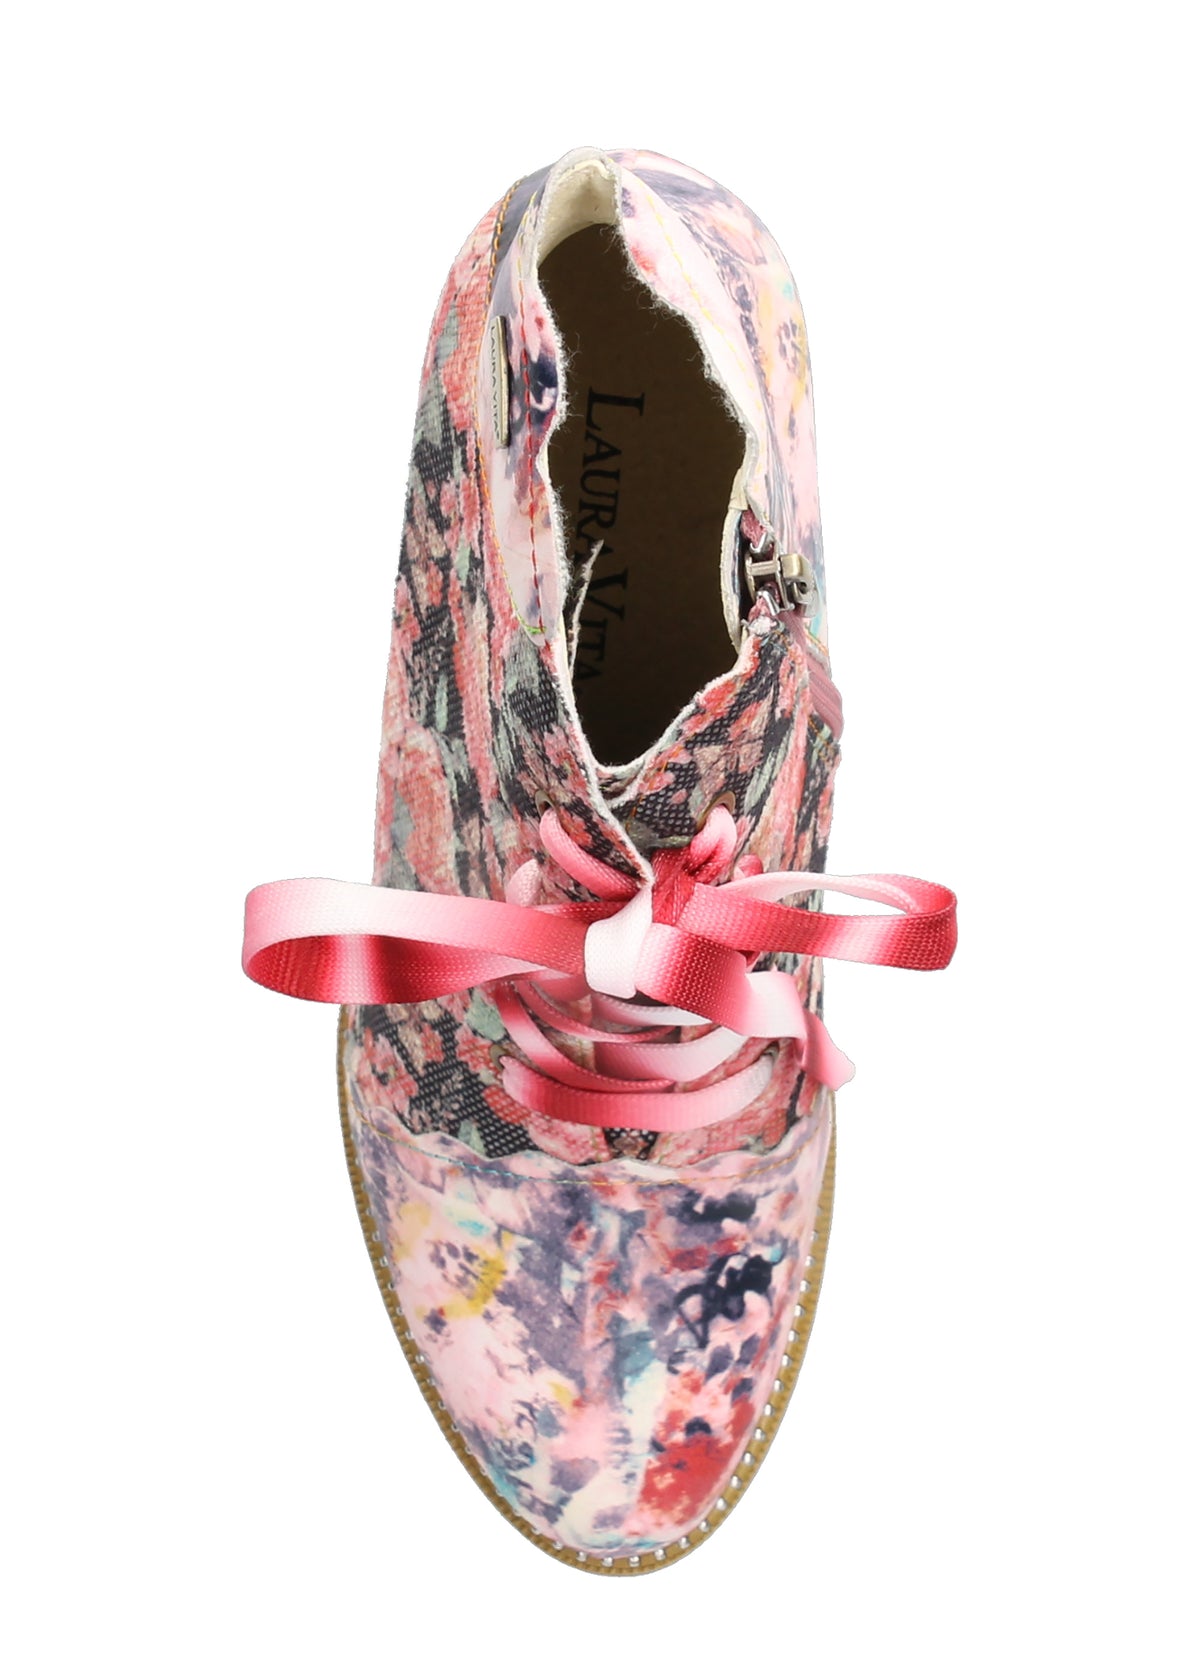 Ankle boots with high heels - pink, floral patterns